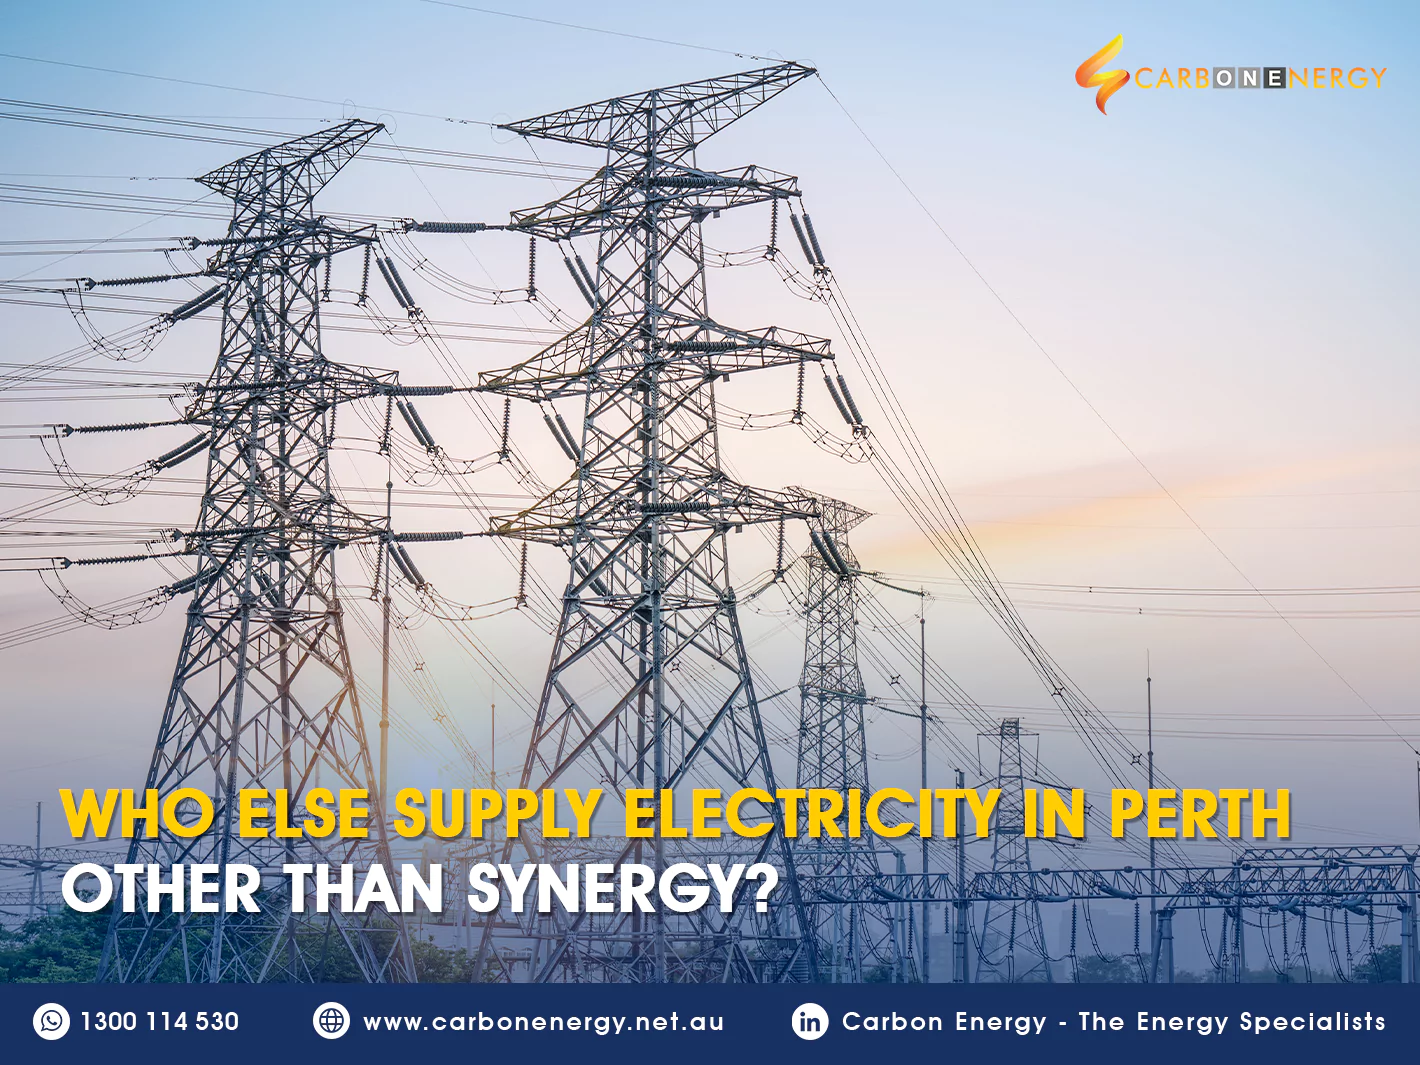 Is Synergy the only Electricity Provider in Perth WA